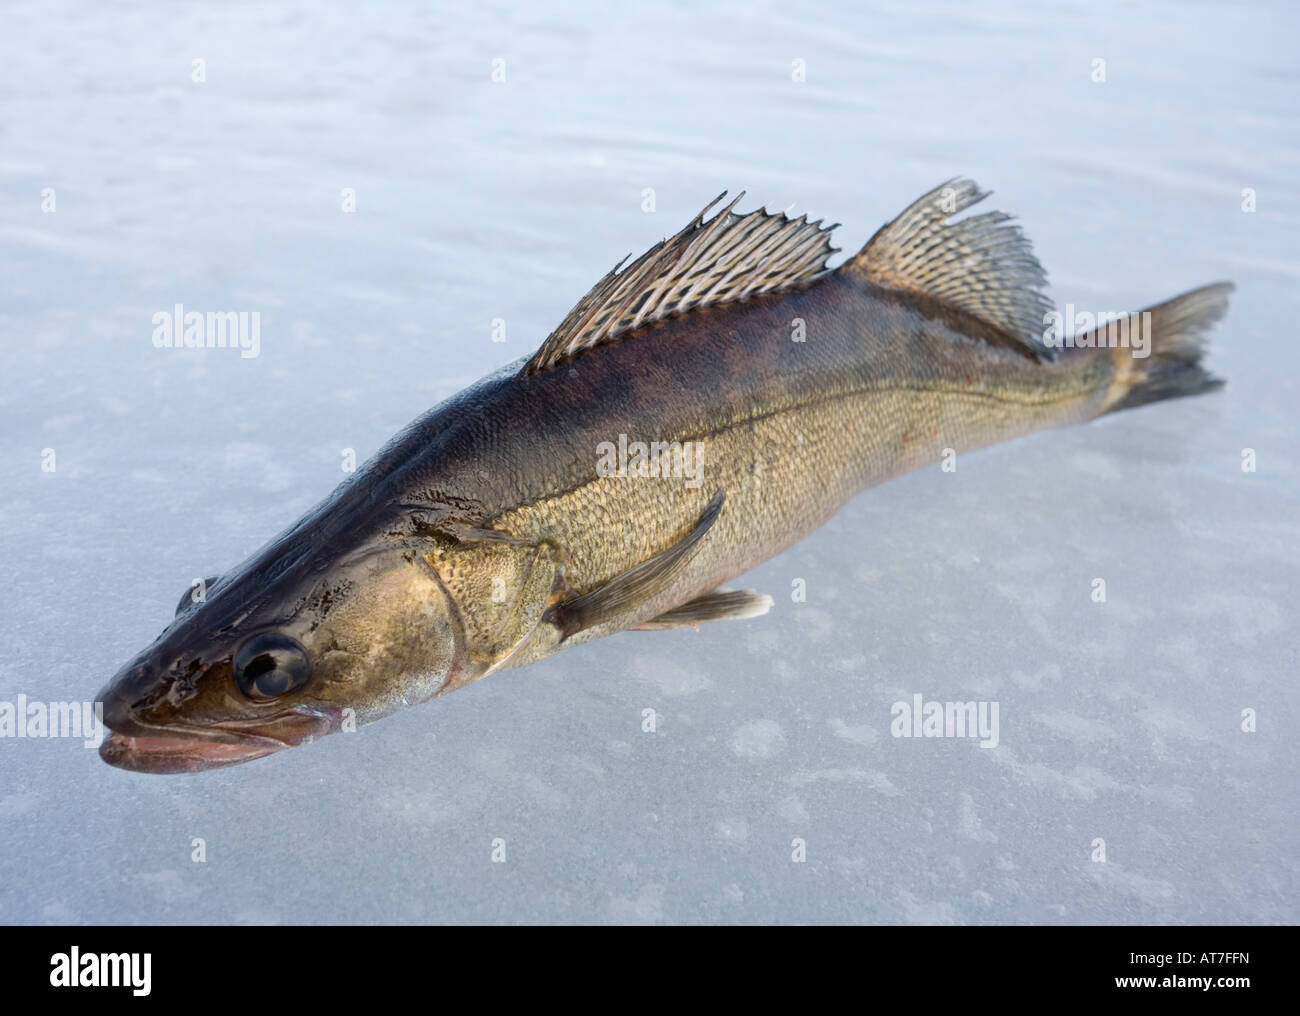 Close-up of a freshly caught European freshwater pikeperch ( Sander lucioperca lucioperca ) on ice , Finland Stock Photo